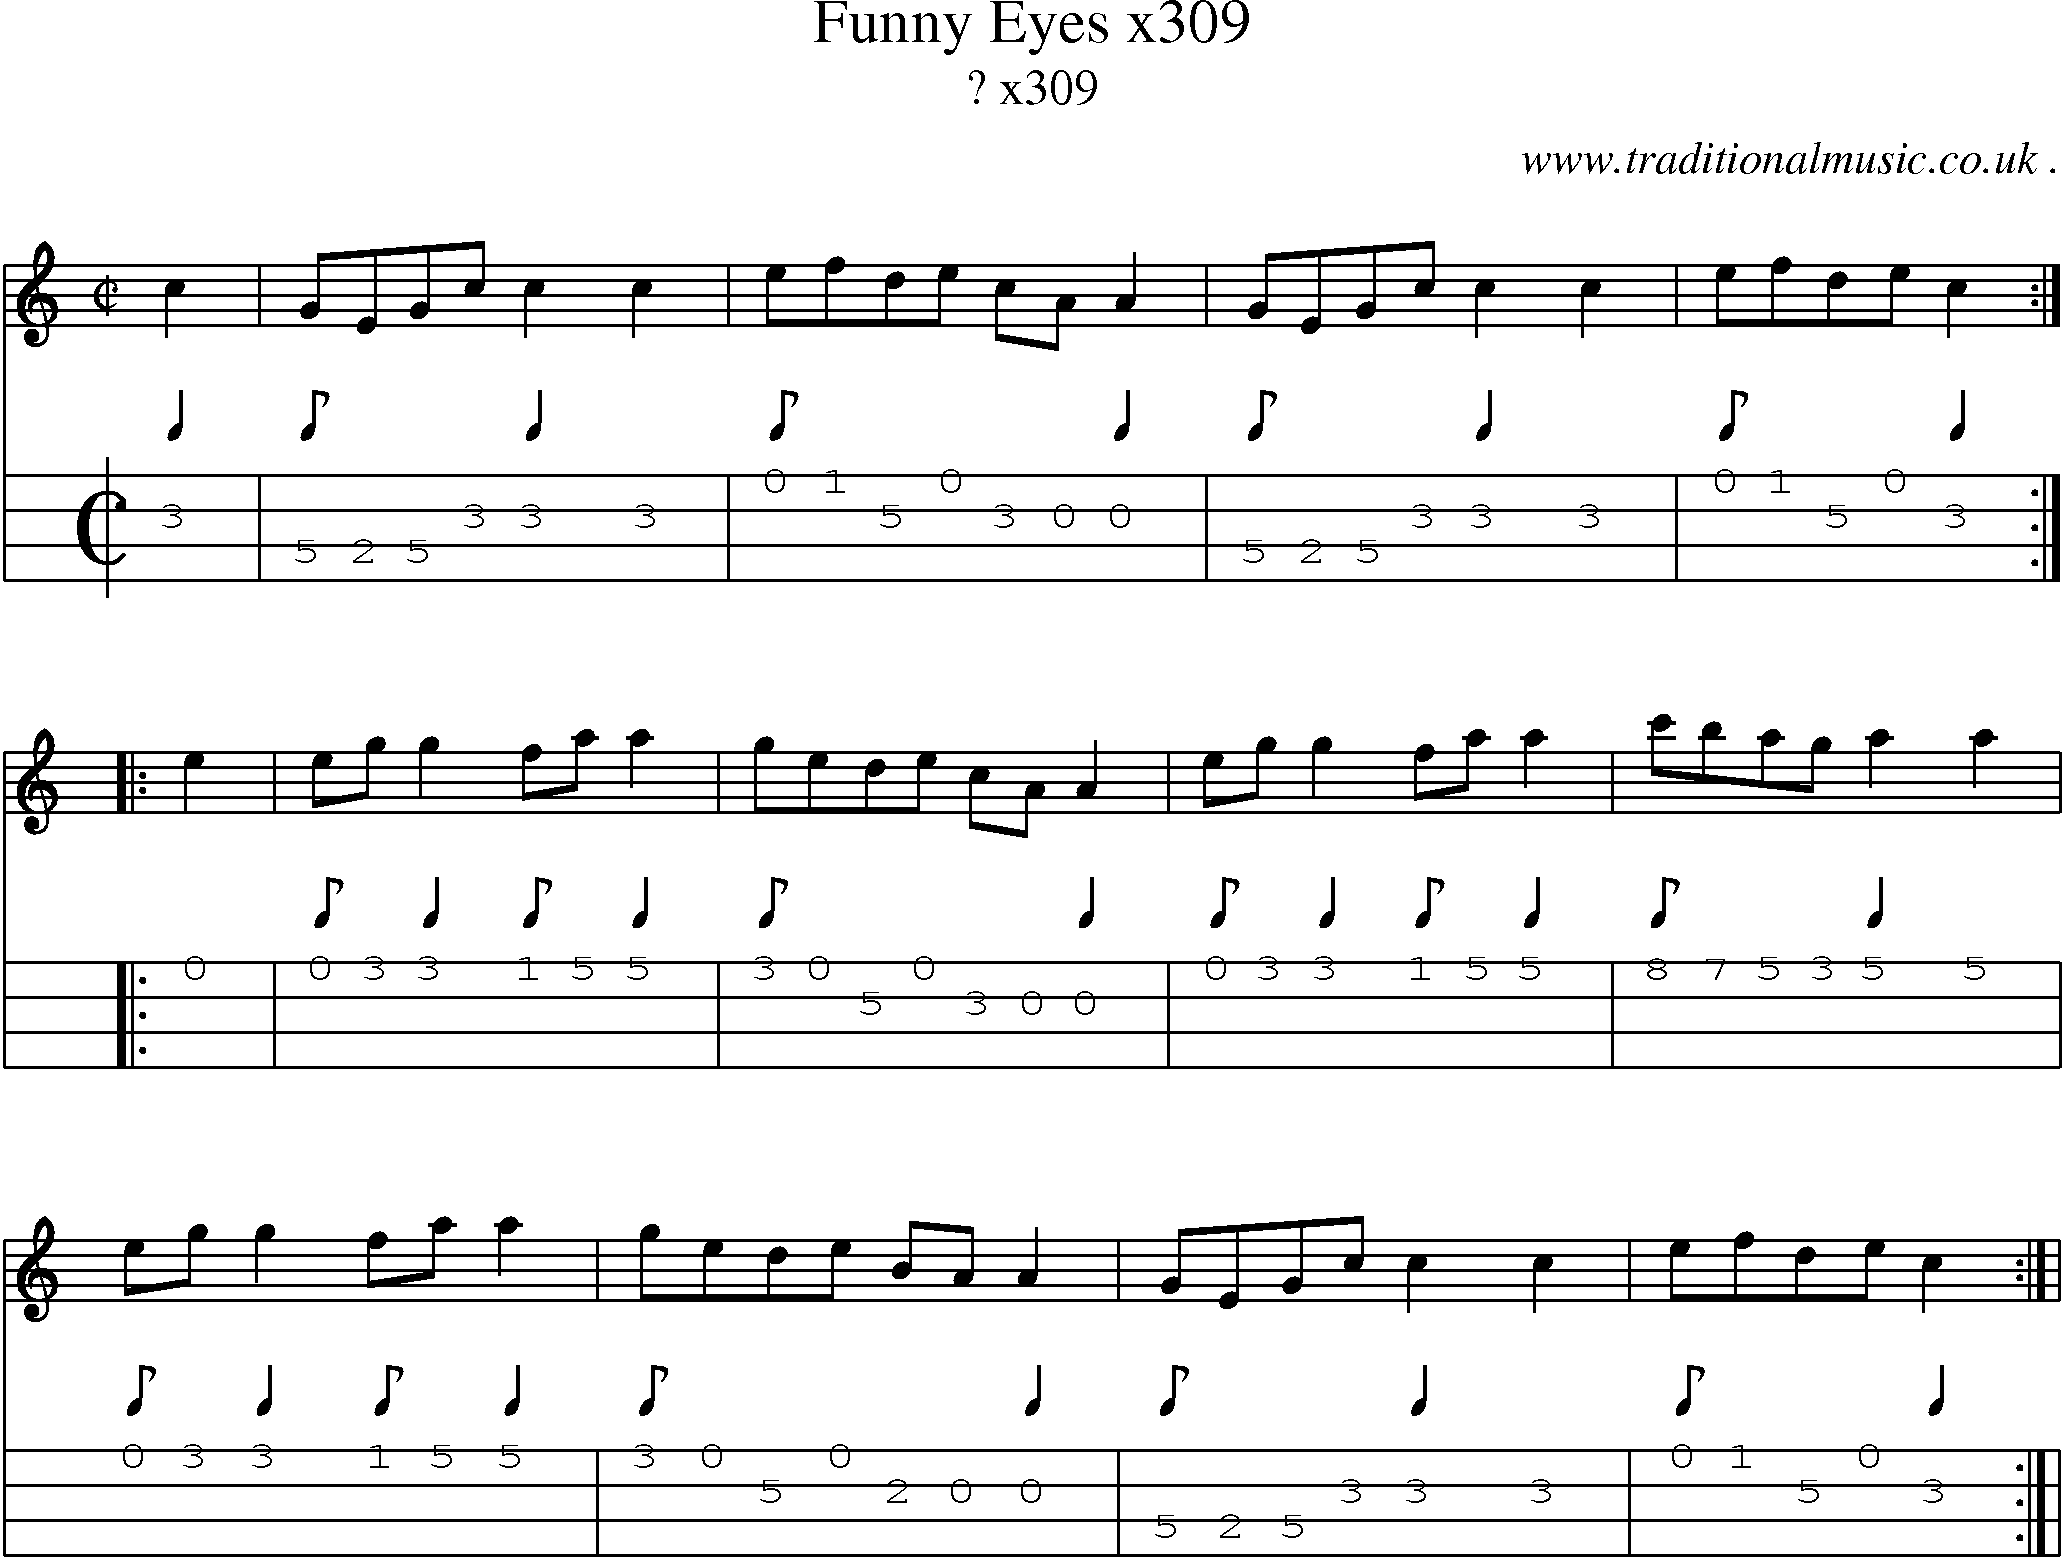 Sheet-Music and Mandolin Tabs for Funny Eyes X309